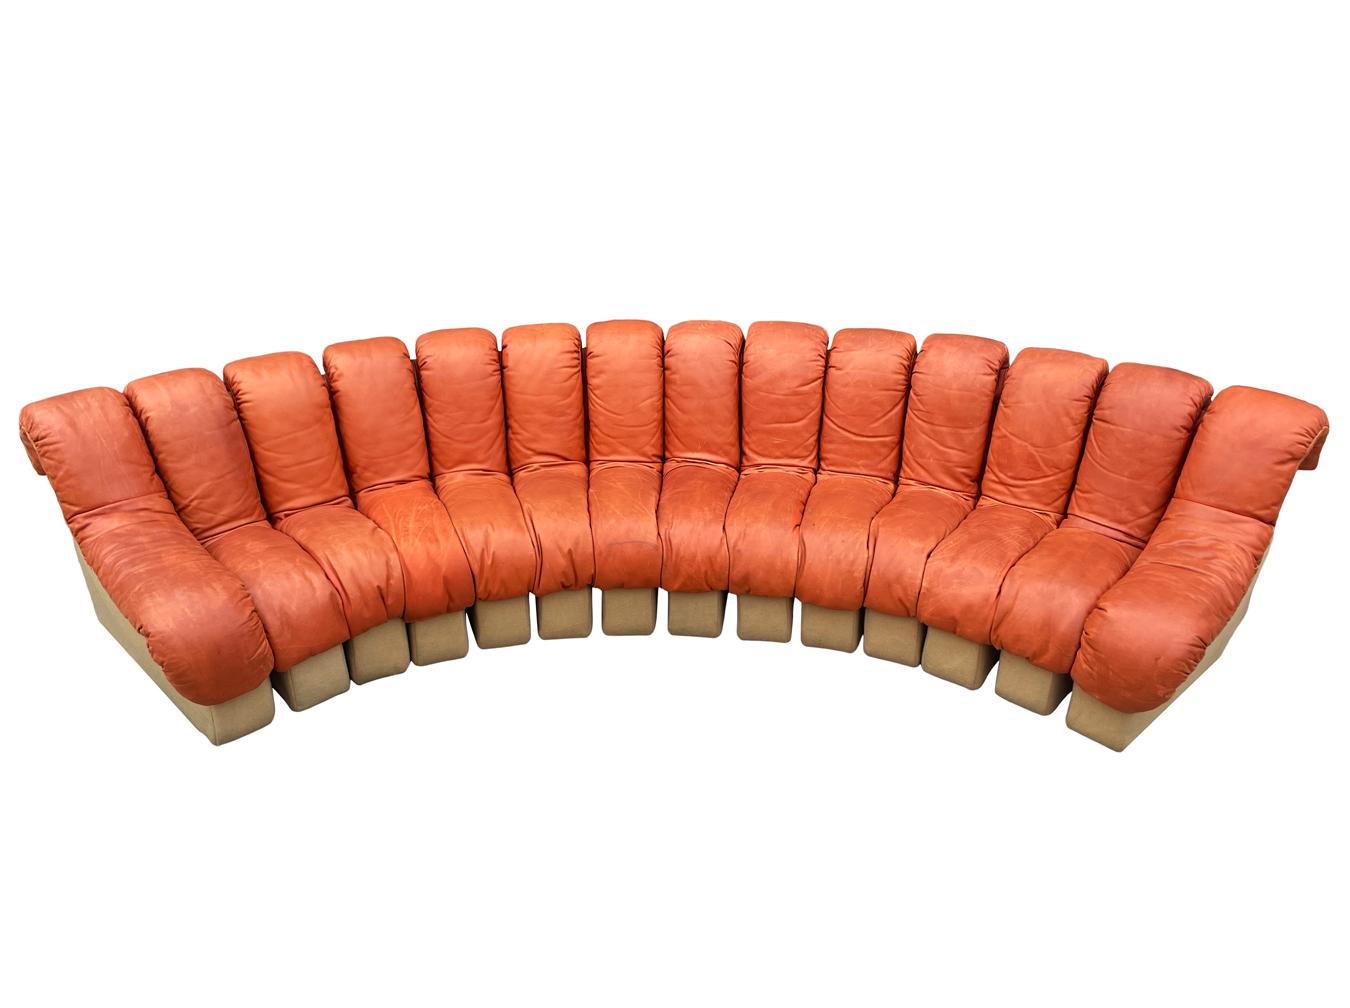 Mid-Century Modern De Sede 600 Nonstop Curved Leather Sectional Sofa in Cognac 5